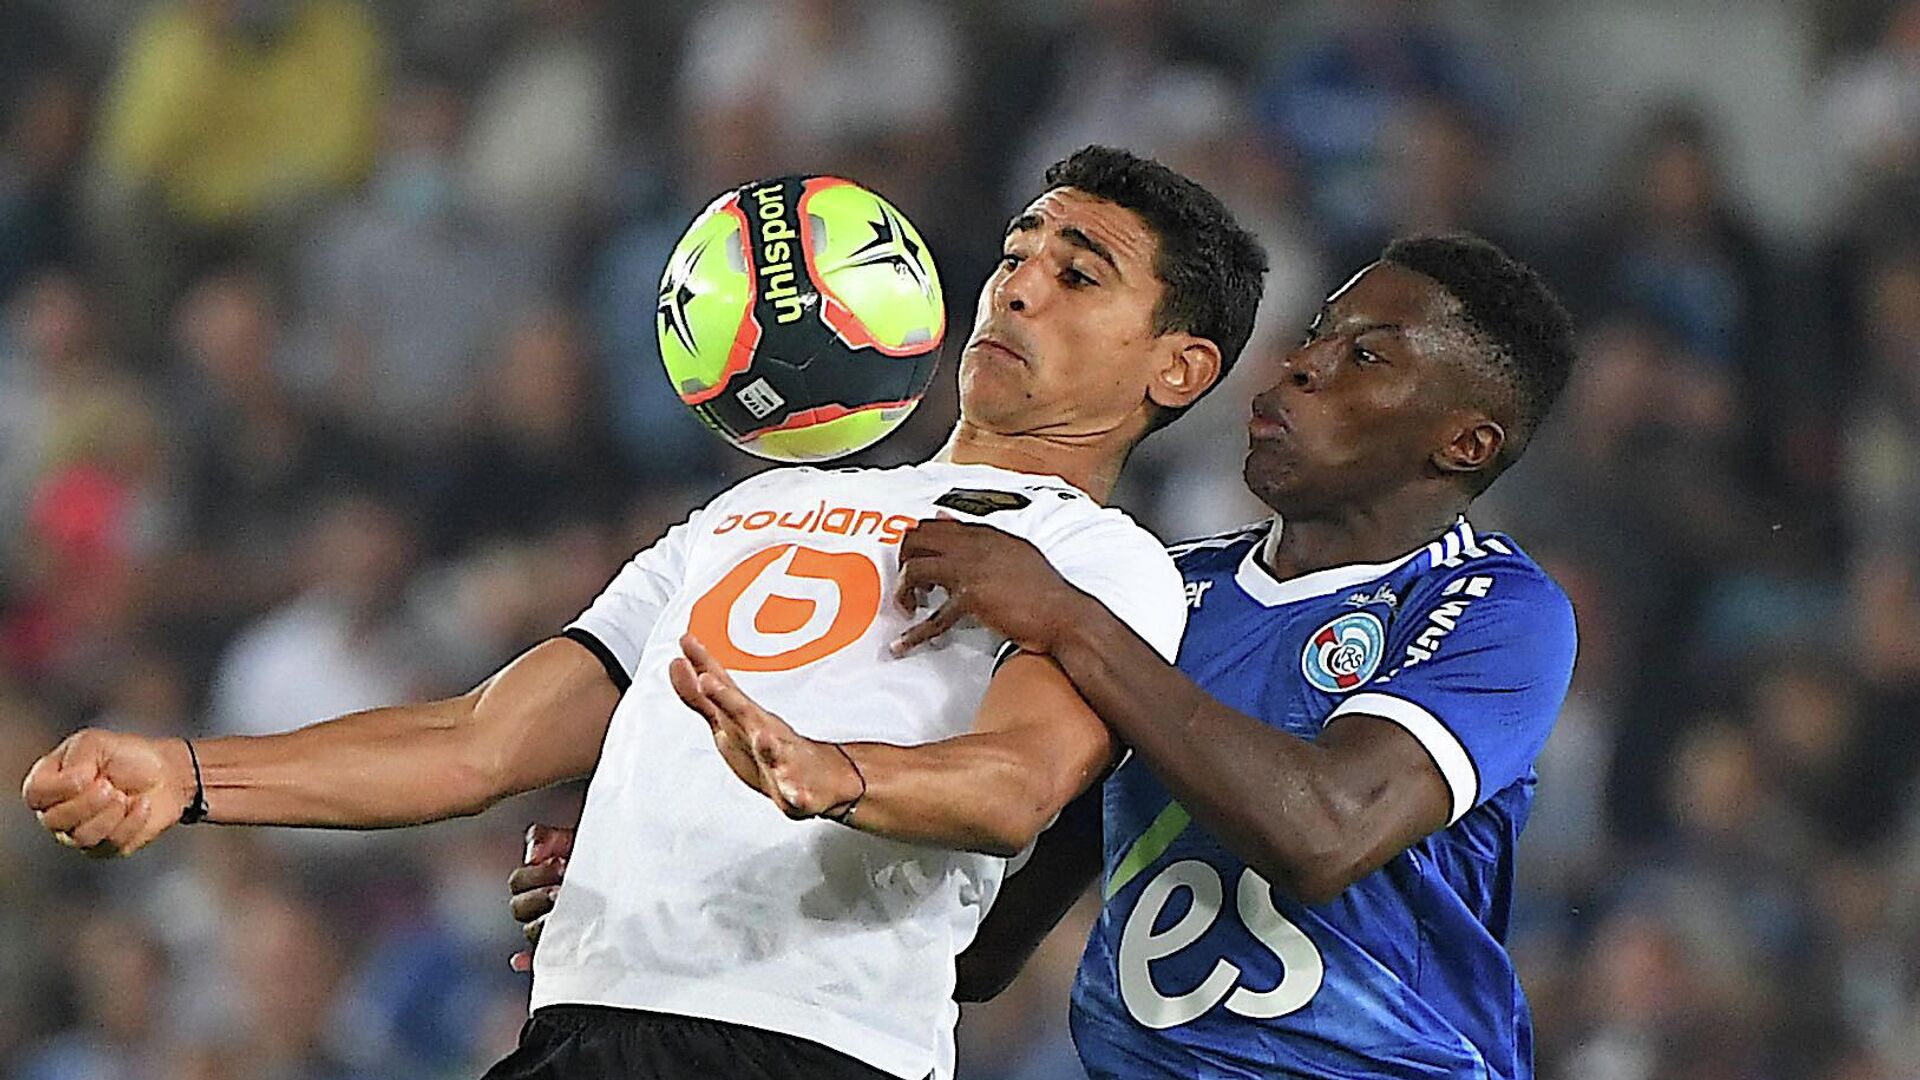 Lille's French midfielder Benjamin Andre (L) is challenged by Strasbourg's French midfielder Jean-Ricner Bellegarde during the French L1 football match between RC Strasbourg Alsace and Lille LOSC at Stade de la Meinau in Strasbourg, eastern France on September 25, 2021. (Photo by PATRICK HERTZOG / AFP) - РИА Новости, 1920, 25.09.2021